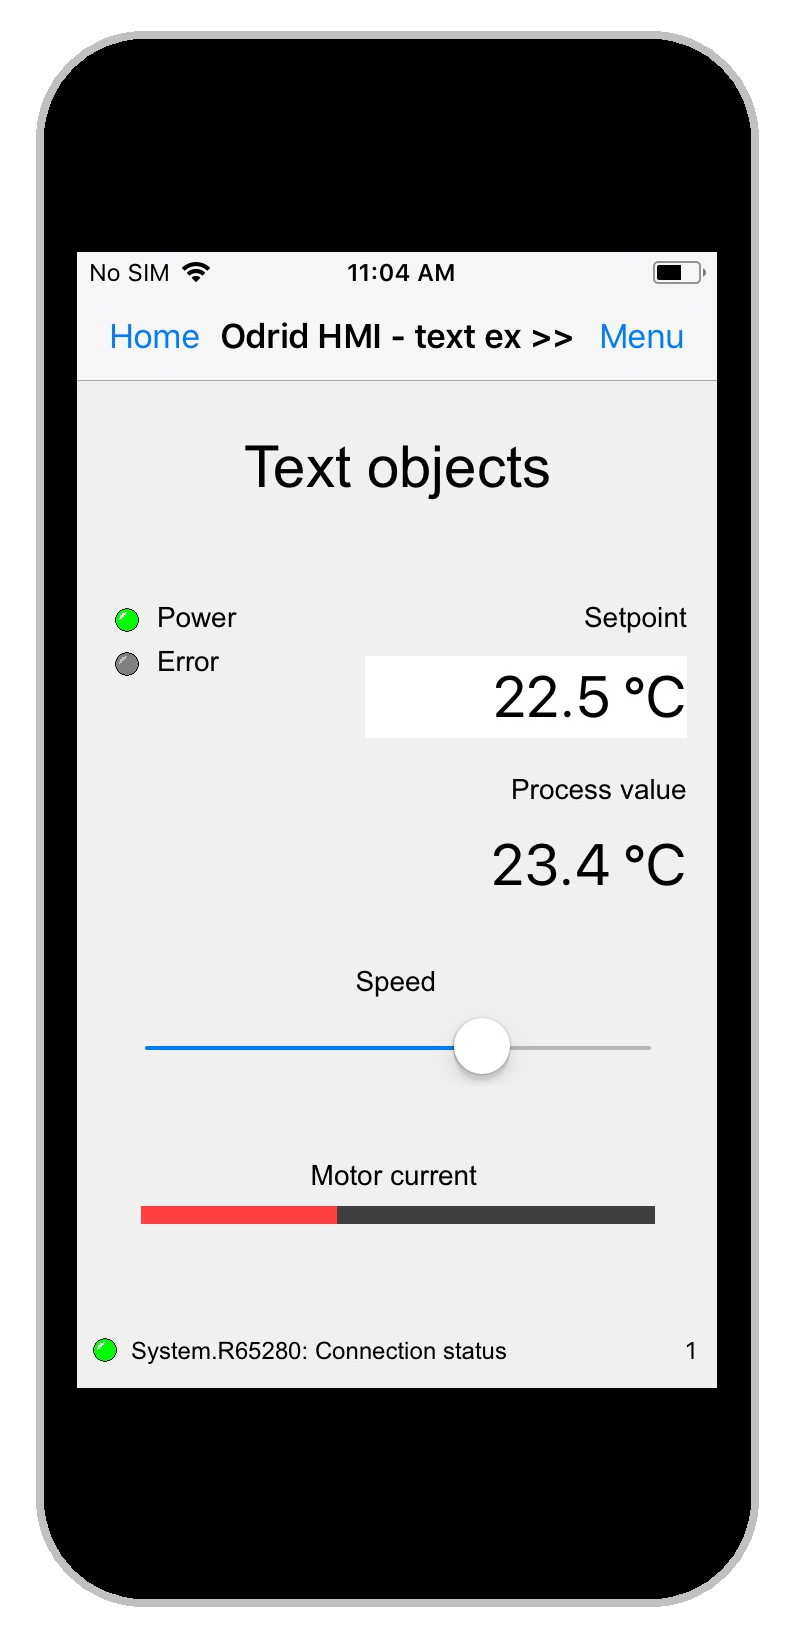 HMI Droid for iOS - text objects labels